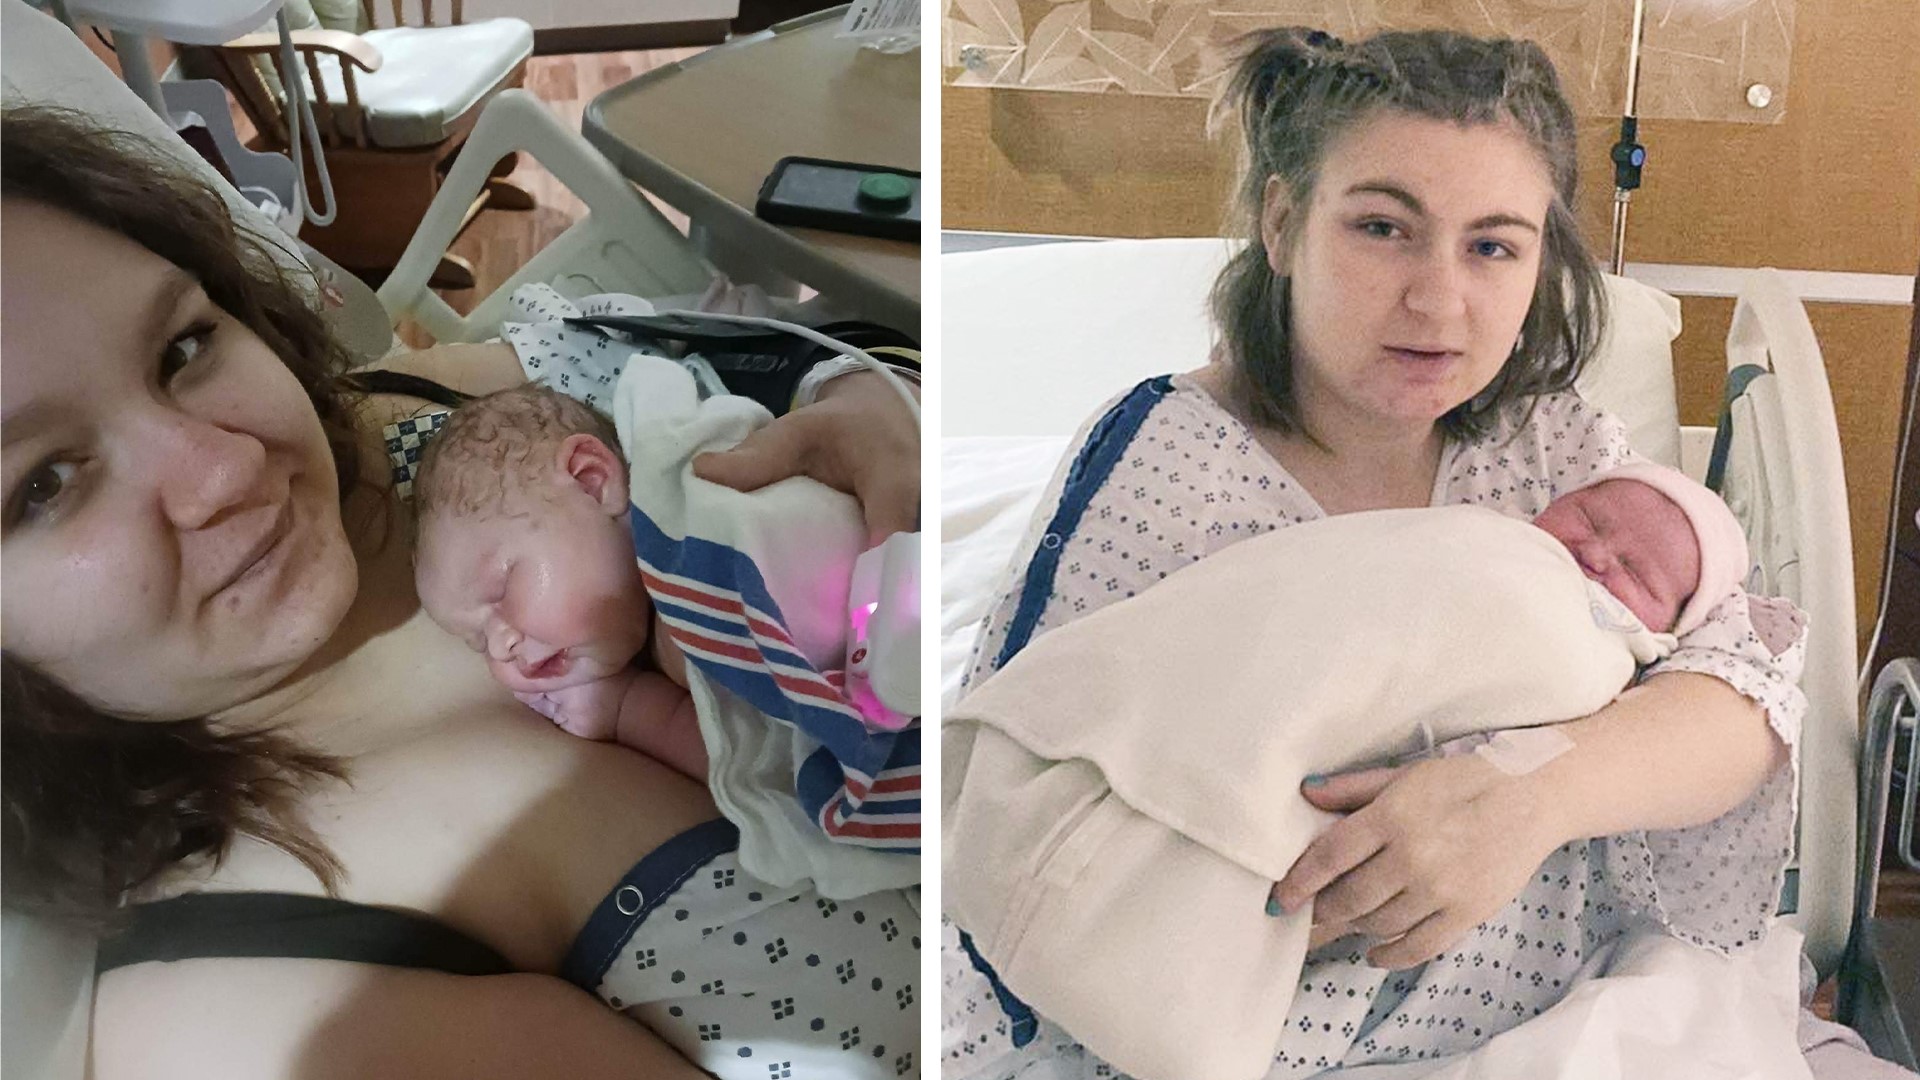 Not only did twins Celci and Delci have their baby girls on the same day, but they were also in adjacent rooms in the same hospital!